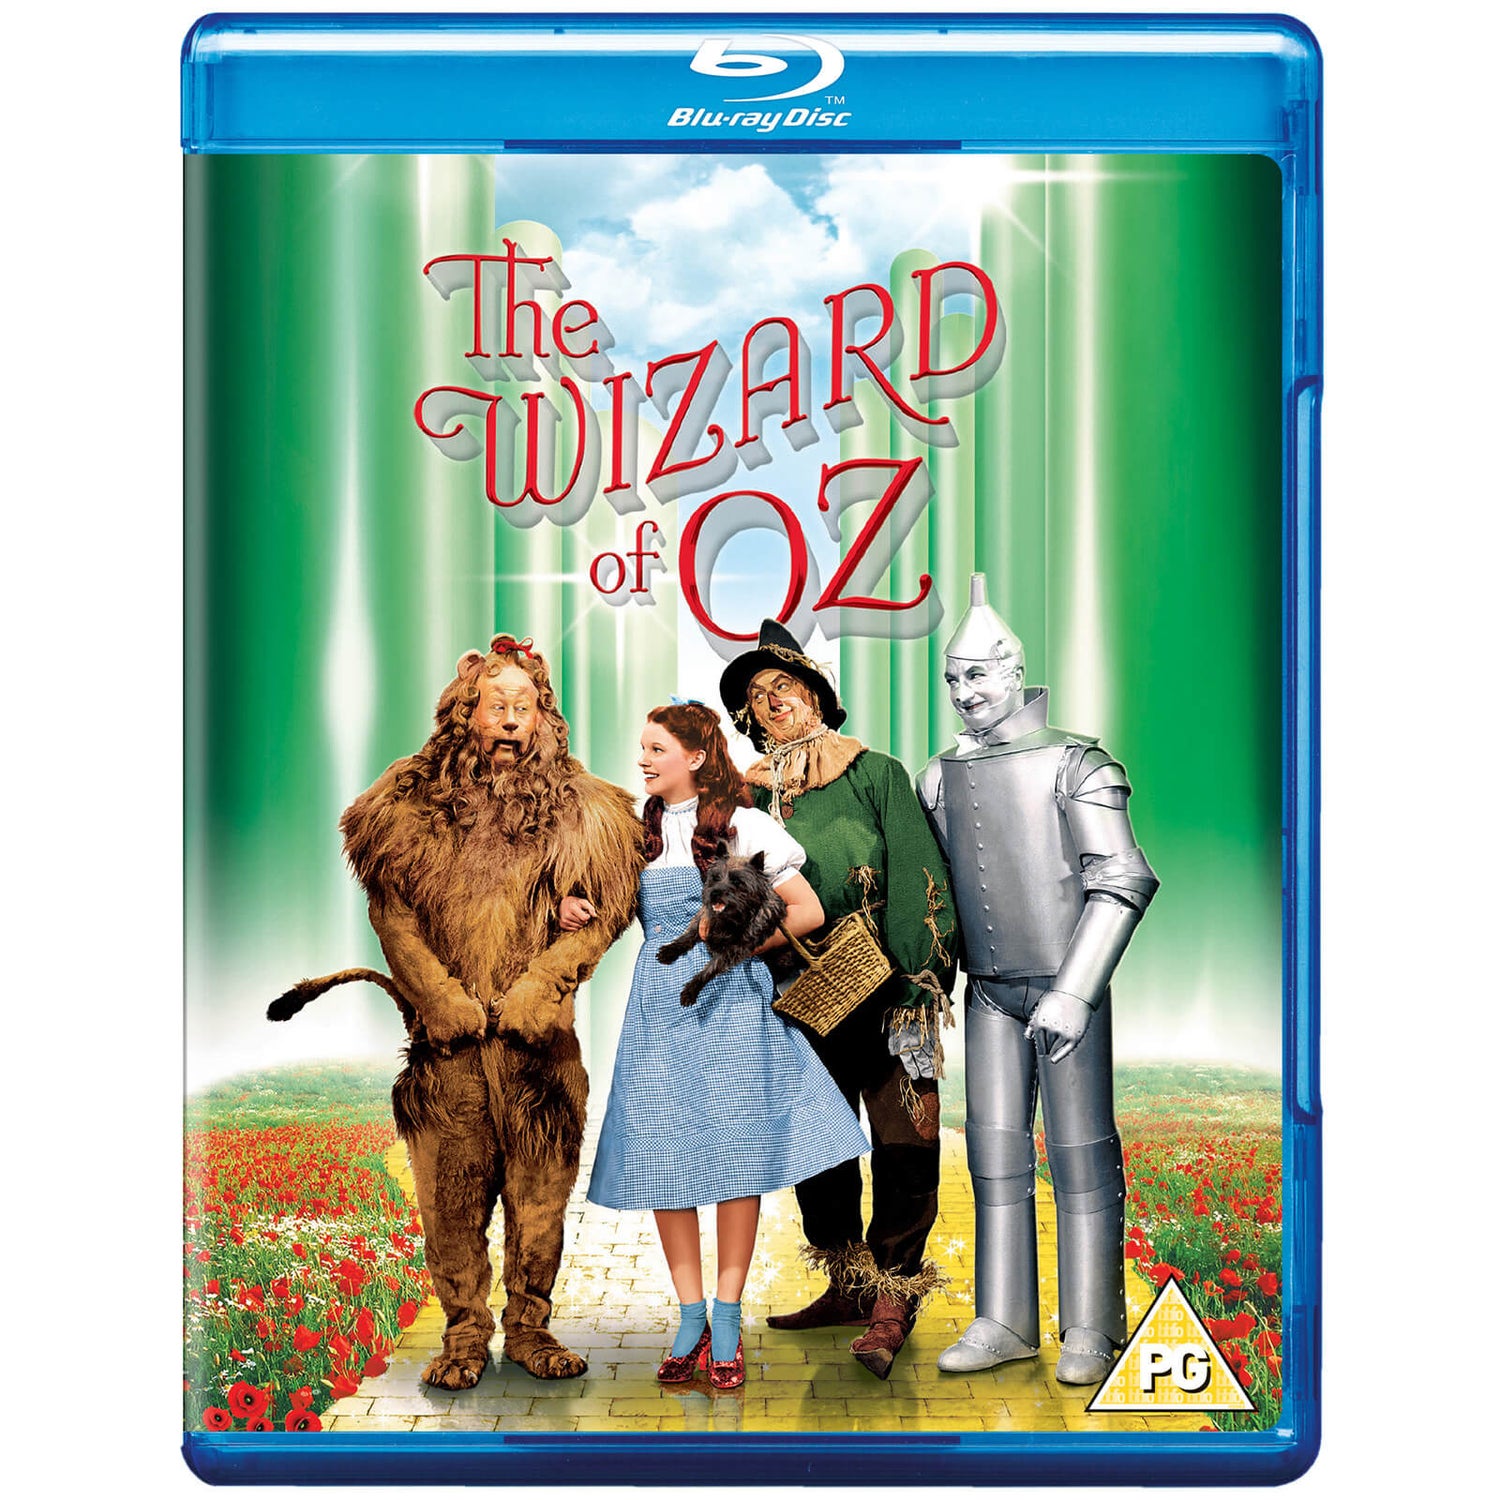 The Wizard of Oz - The 75th Anniversary Edition